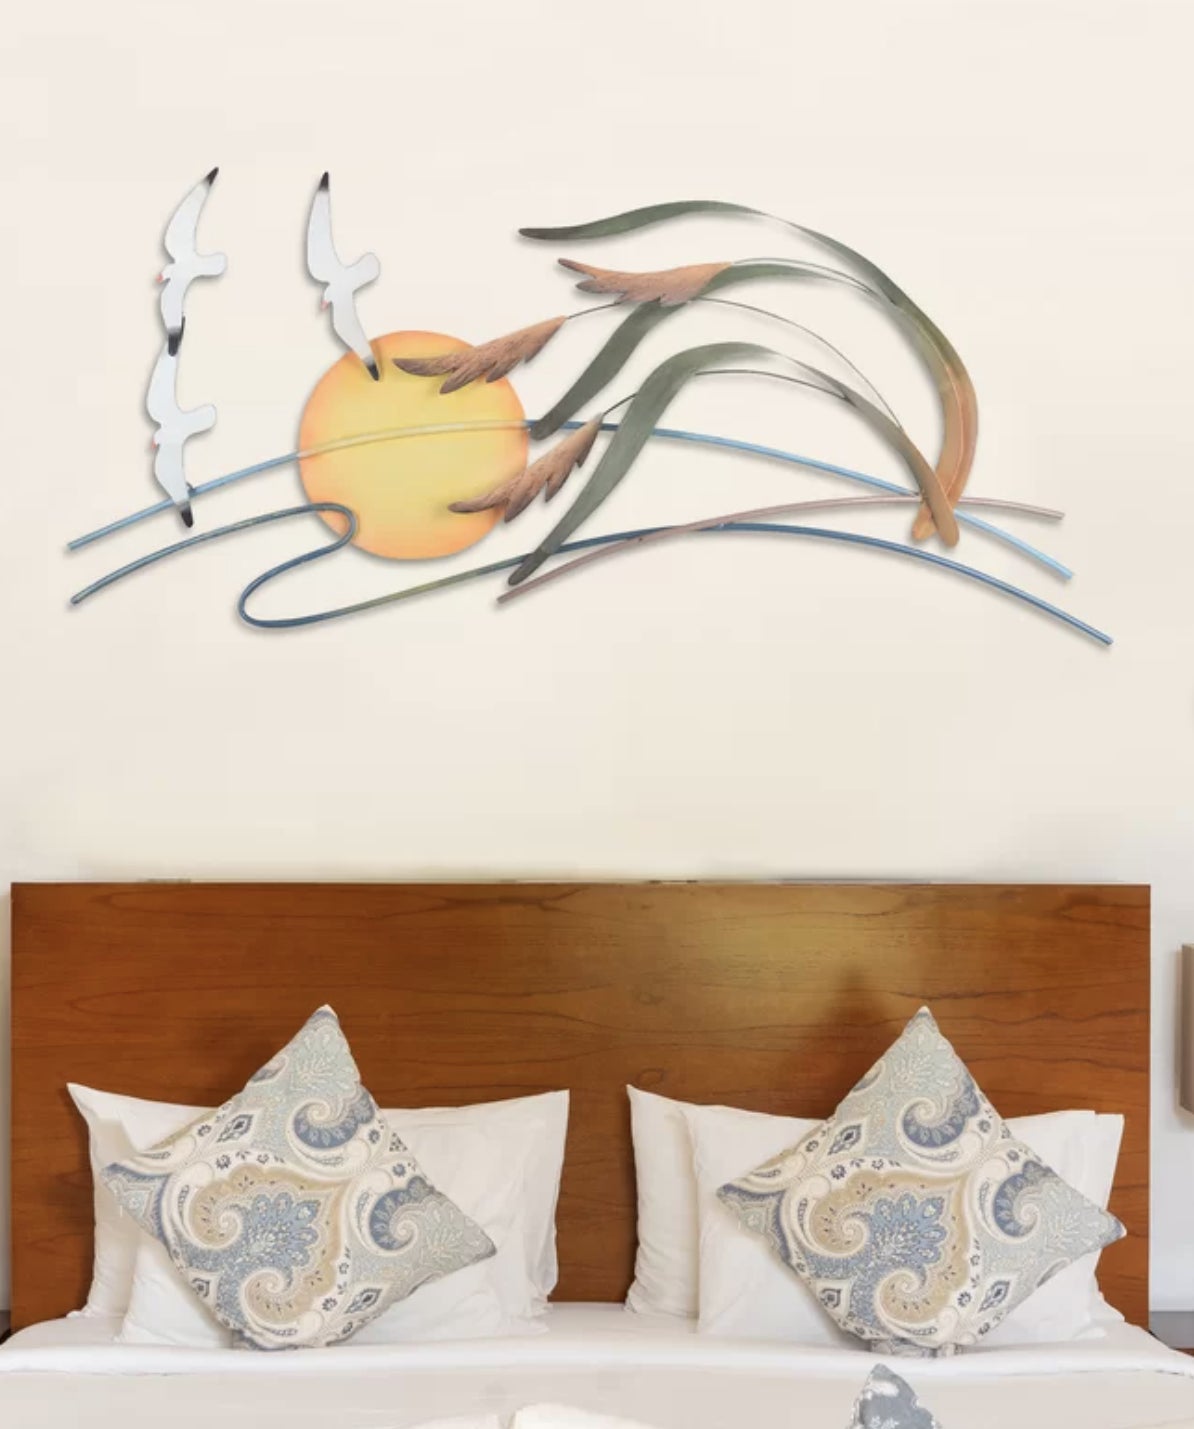 A decorative metal wall art piece featuring an abstract sun and waves design above a bed with two pillows